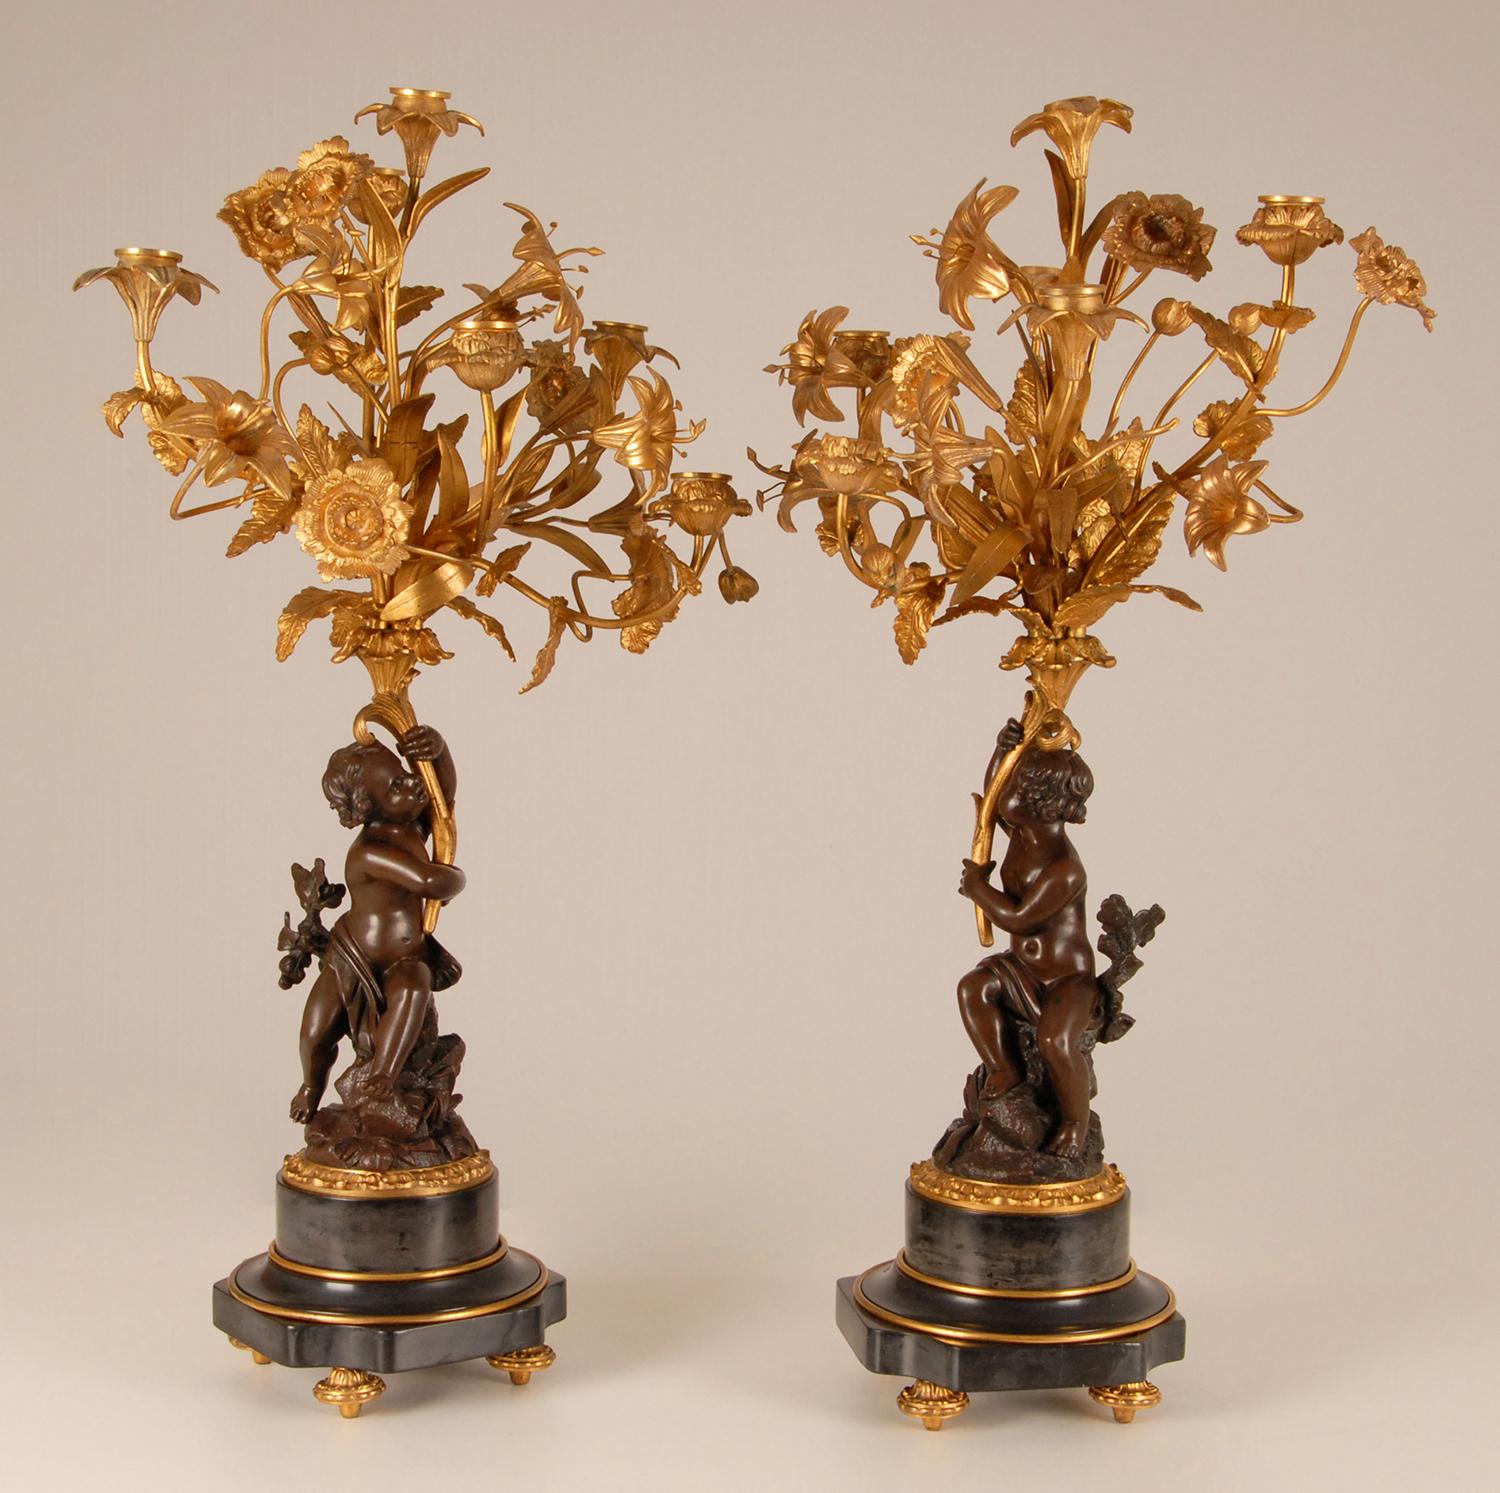 Antique French gilt bronze candelabras Putto holding a bunch of flowers
Antique French gold gilded bronze 6 light Candelabra on a marble base - a pair
Material: Gold gilded bronze, patinated bronze, marble
Design: In the manner of Claude Michel